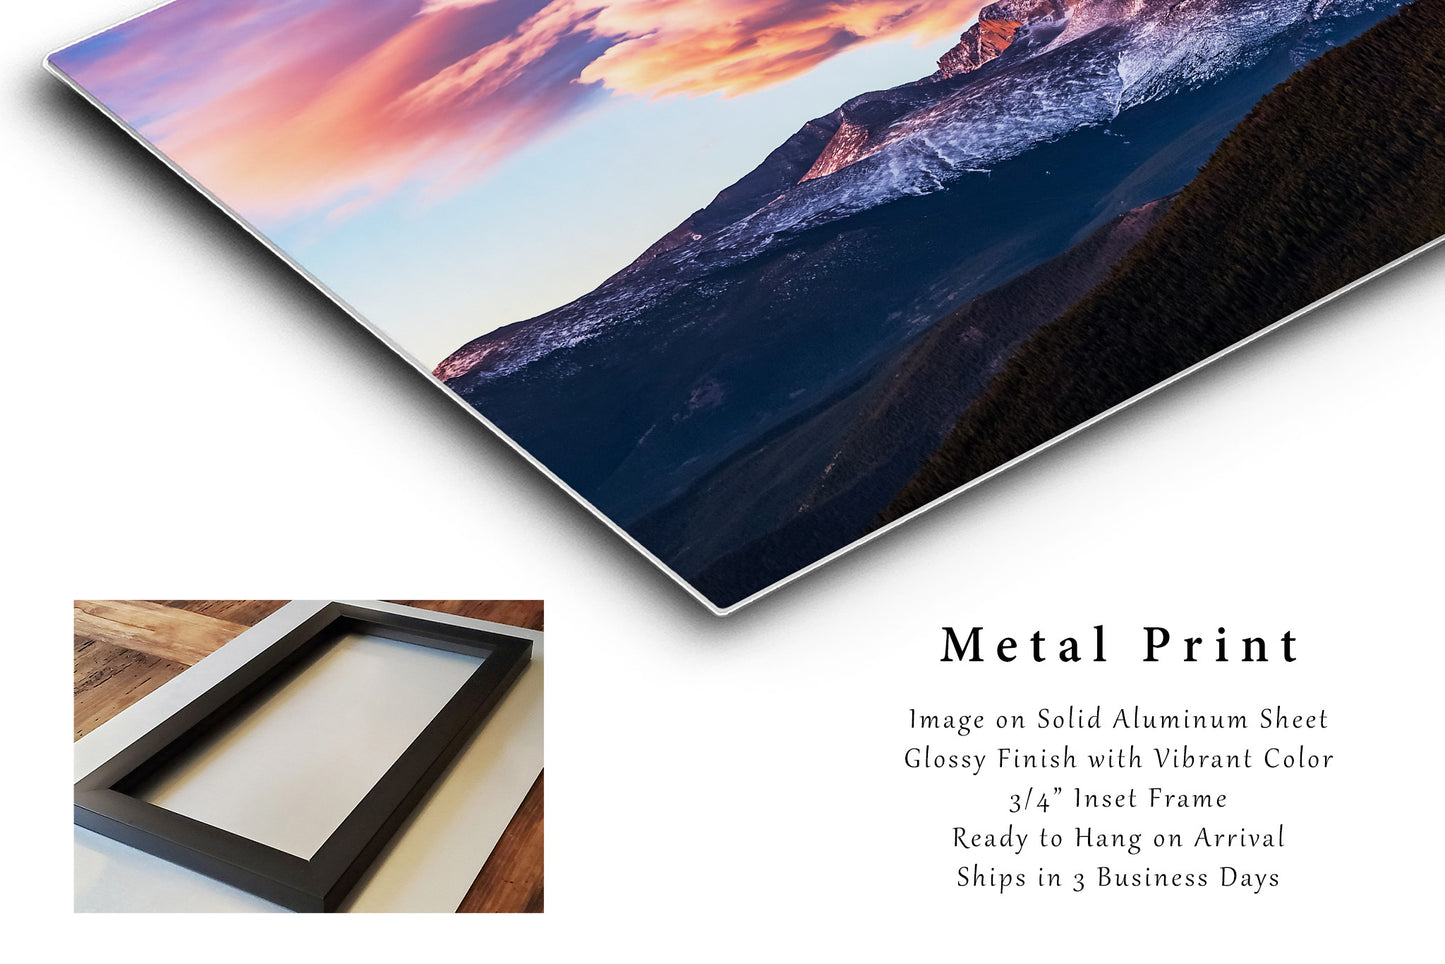 Rocky Mountain National Park Metal Print (Ready to Hang) Photo on Aluminum of Longs Peak with Cloud Rising Above at Sunrise in Colorado Western Wall Art Nature Decor